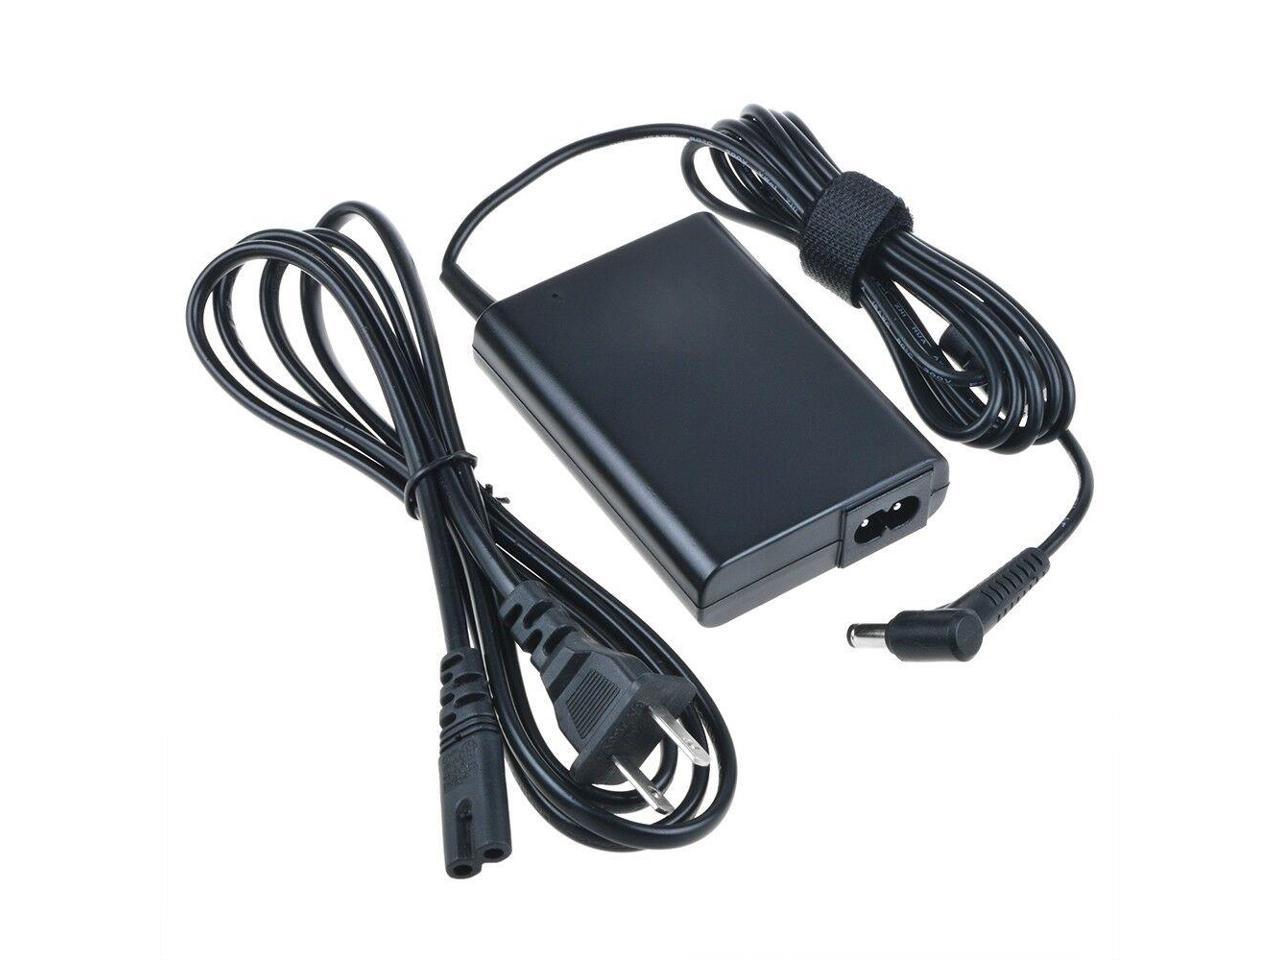 PwrON AC DC Adapter Charger for ViewSonic VX2770SMH-LED Frameless LED Monitor 